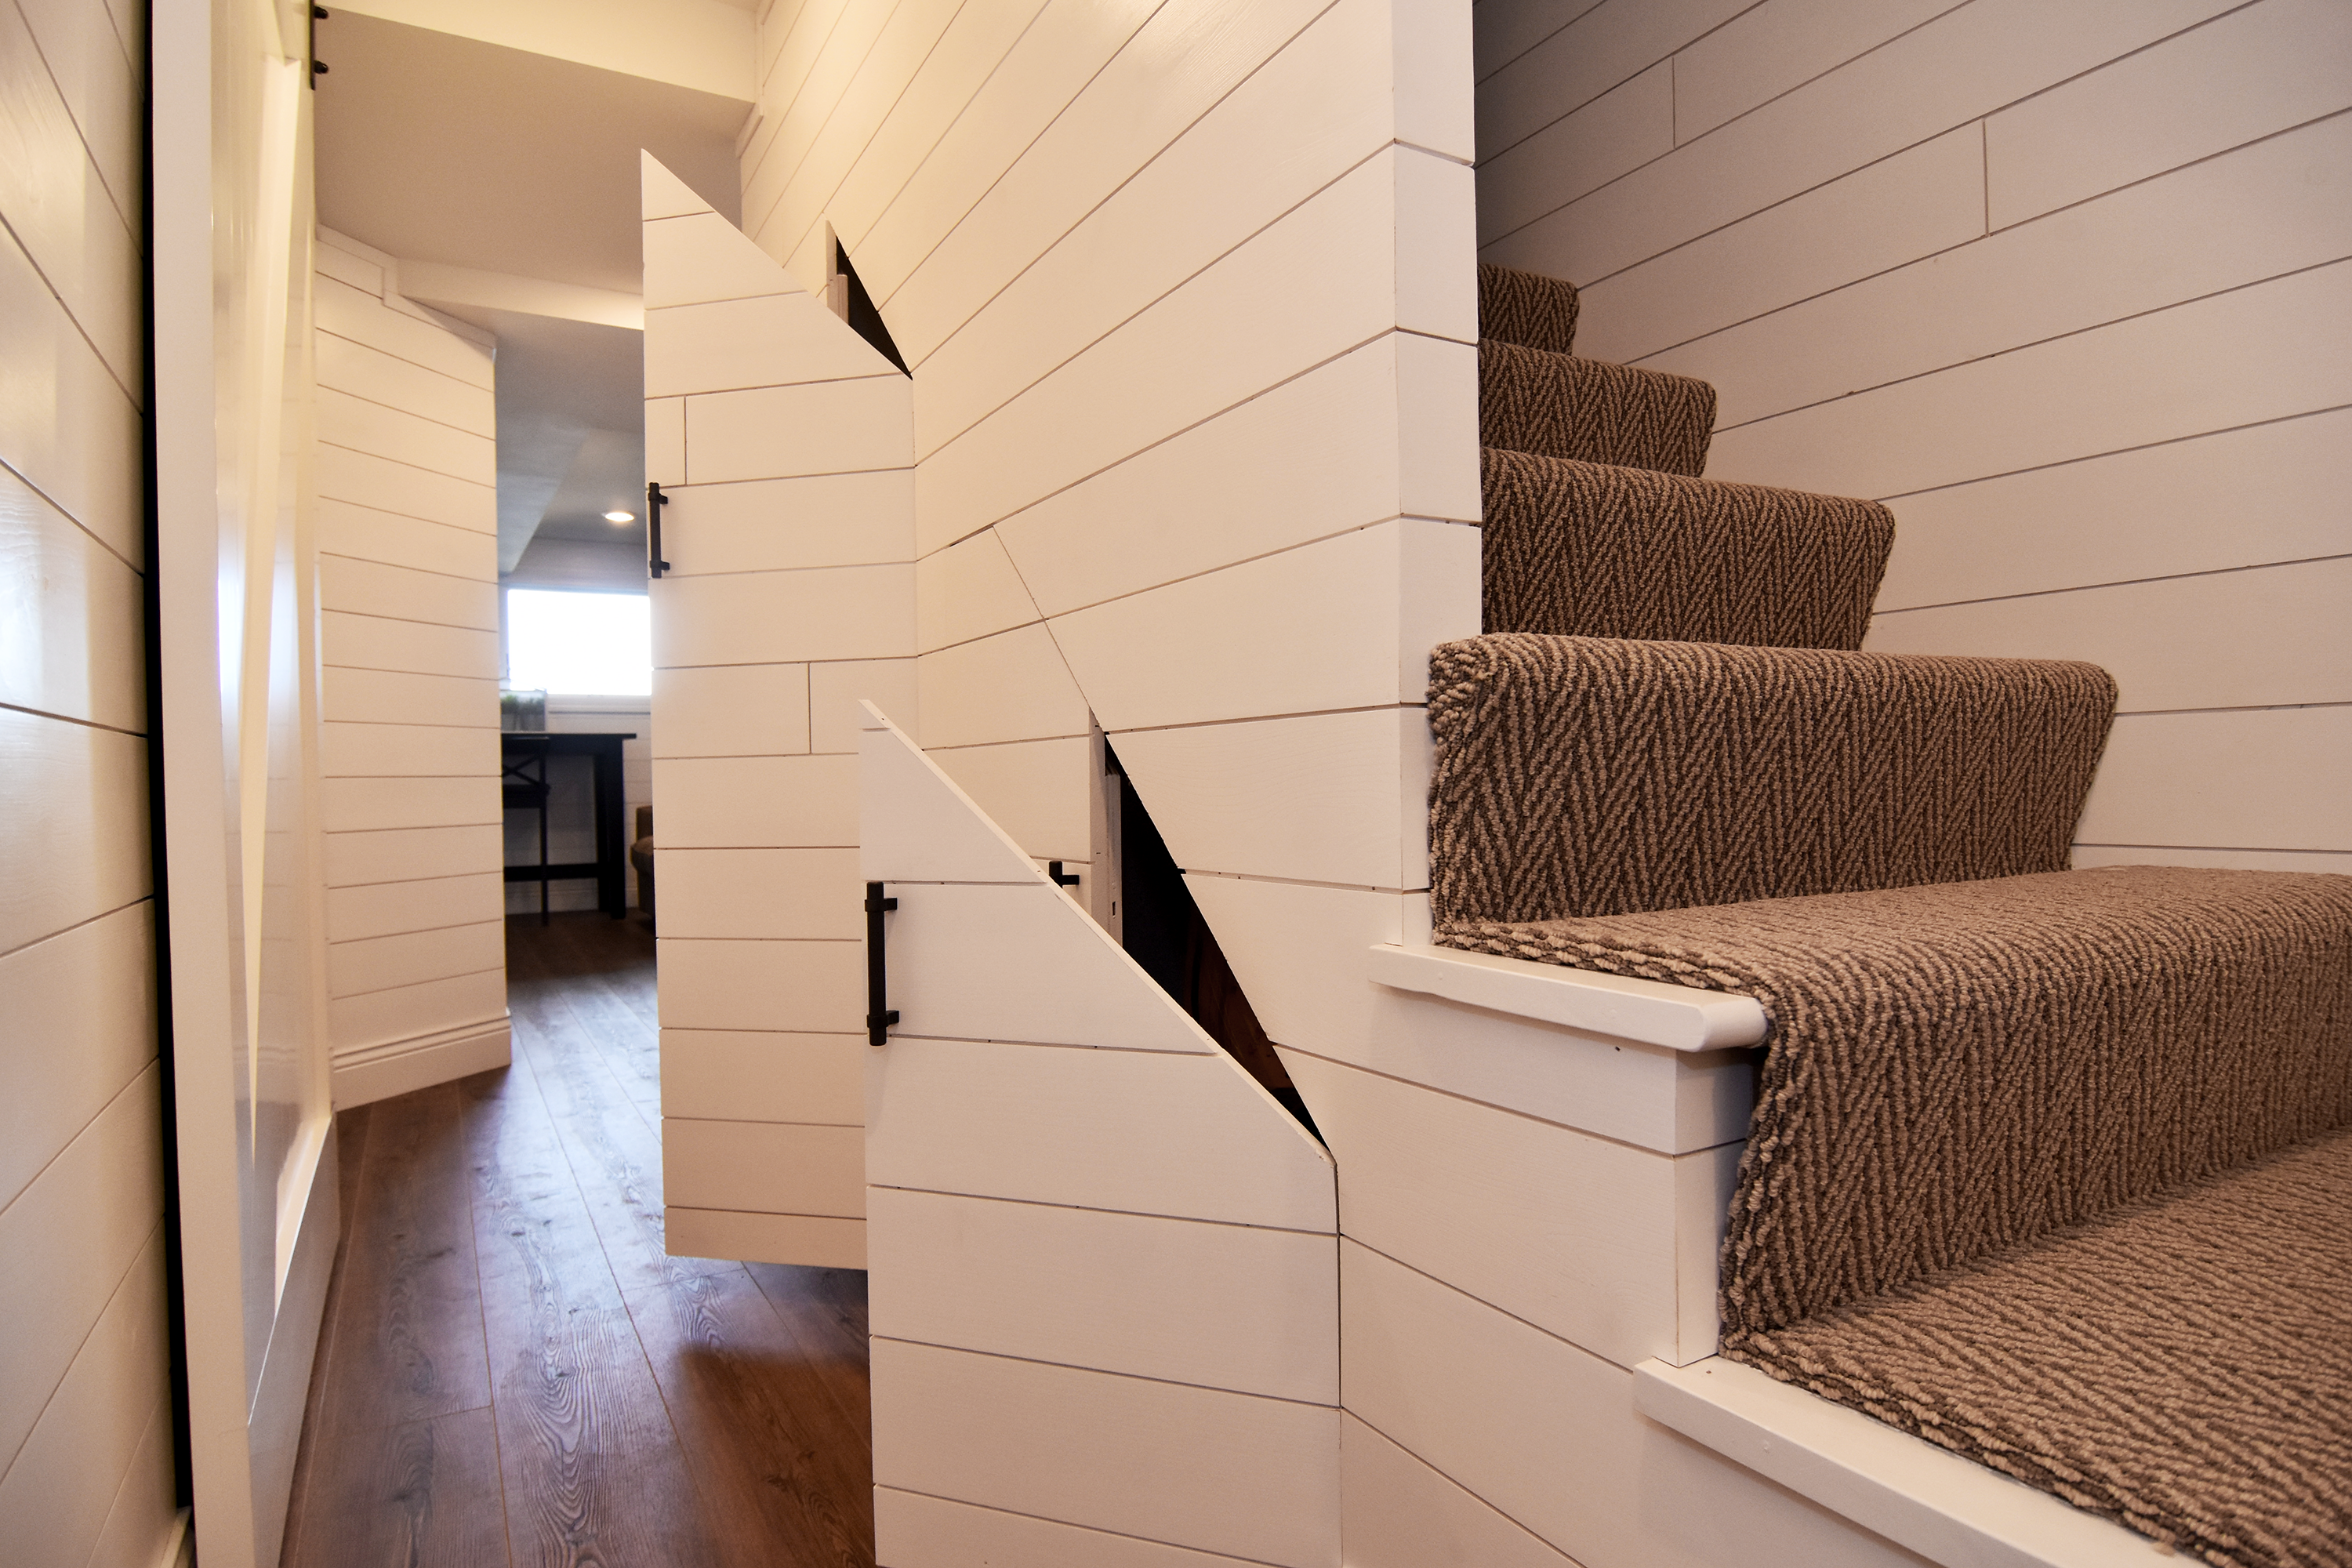 Cozy Basement - Staircase - White Wood with doors for storage under staircase